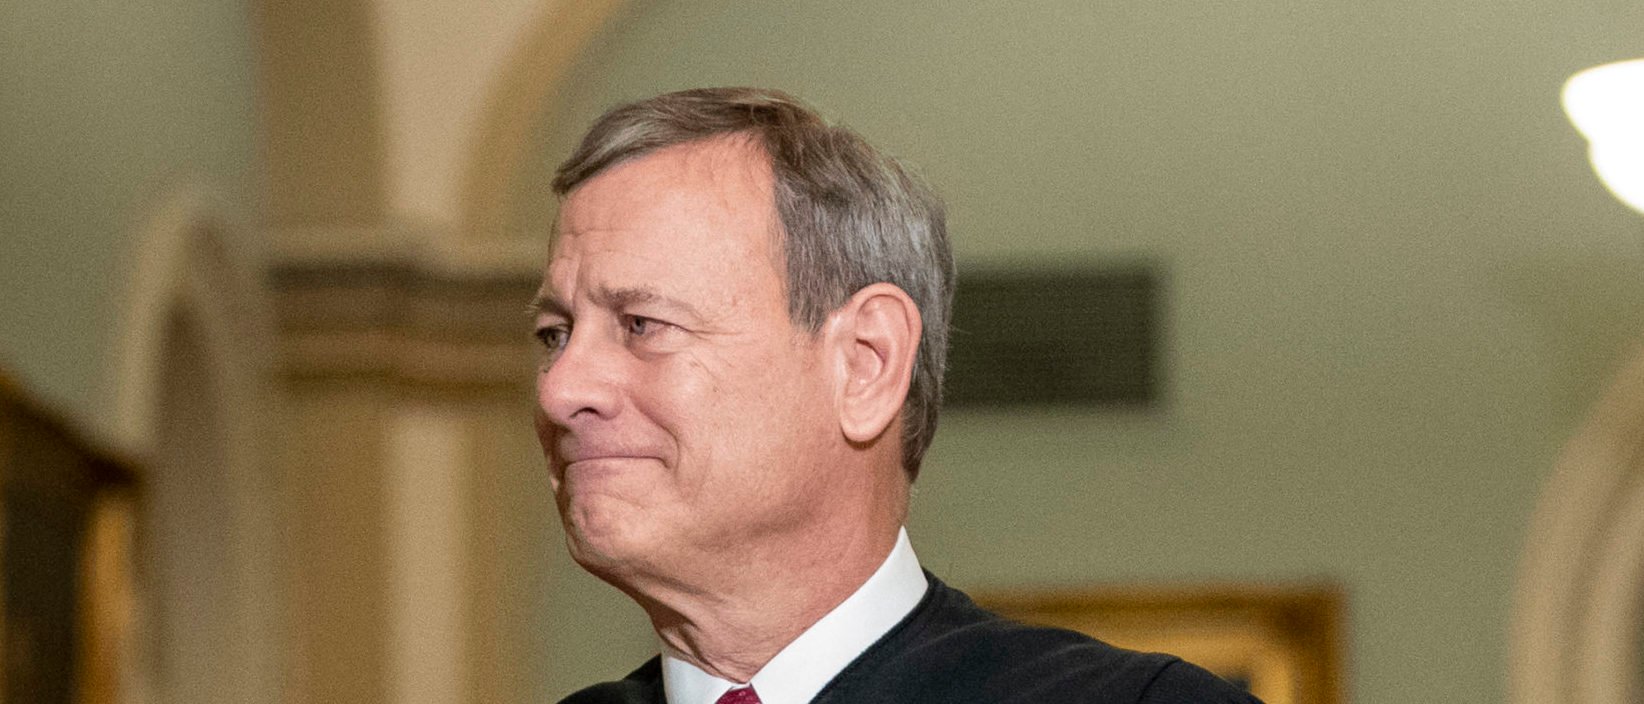 WASHINGTON, DC JANUARY 16: Supreme Court Chief Justice John Roberts arrives to the Senate chamber for impeachment proceedings at the U.S. Capitol on January 16, 2020 in Washington, DC. On Thursday, the House impeachment managers will read the articles of impeachment against President Trump in the Senate chamber and the chief justice of the Supreme Court and every senator will be sworn in. (Photo by Drew Angerer/Getty Images)